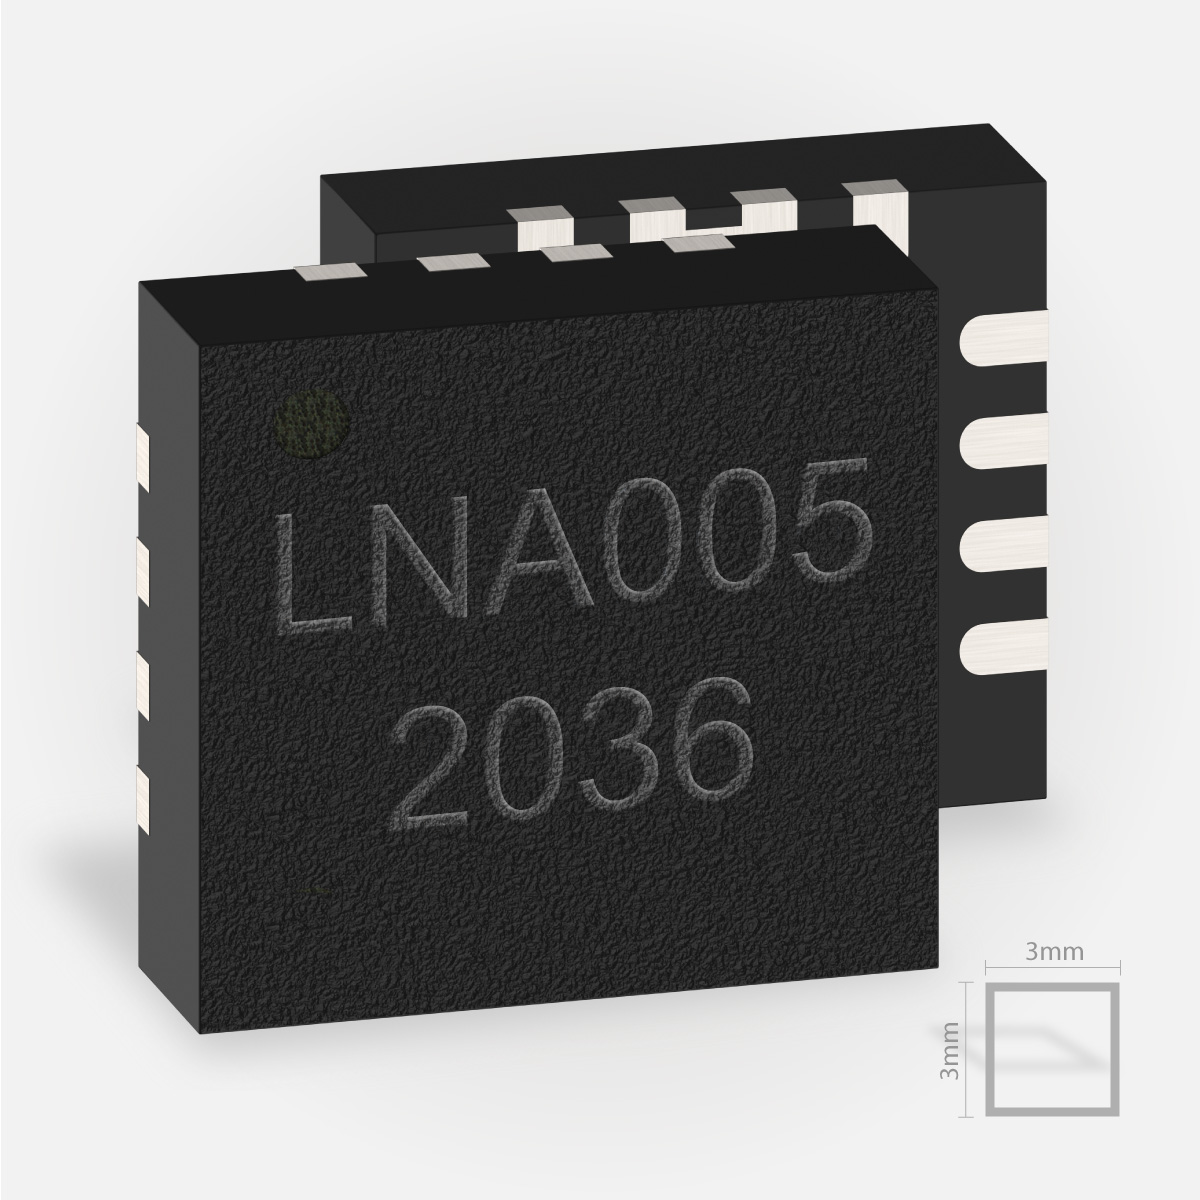 The-LNA-024-005-24-GHz-Low-Noise-Amplifier-From-indie-Semiconductors-Is-Available-At-Symmetry-Electronics